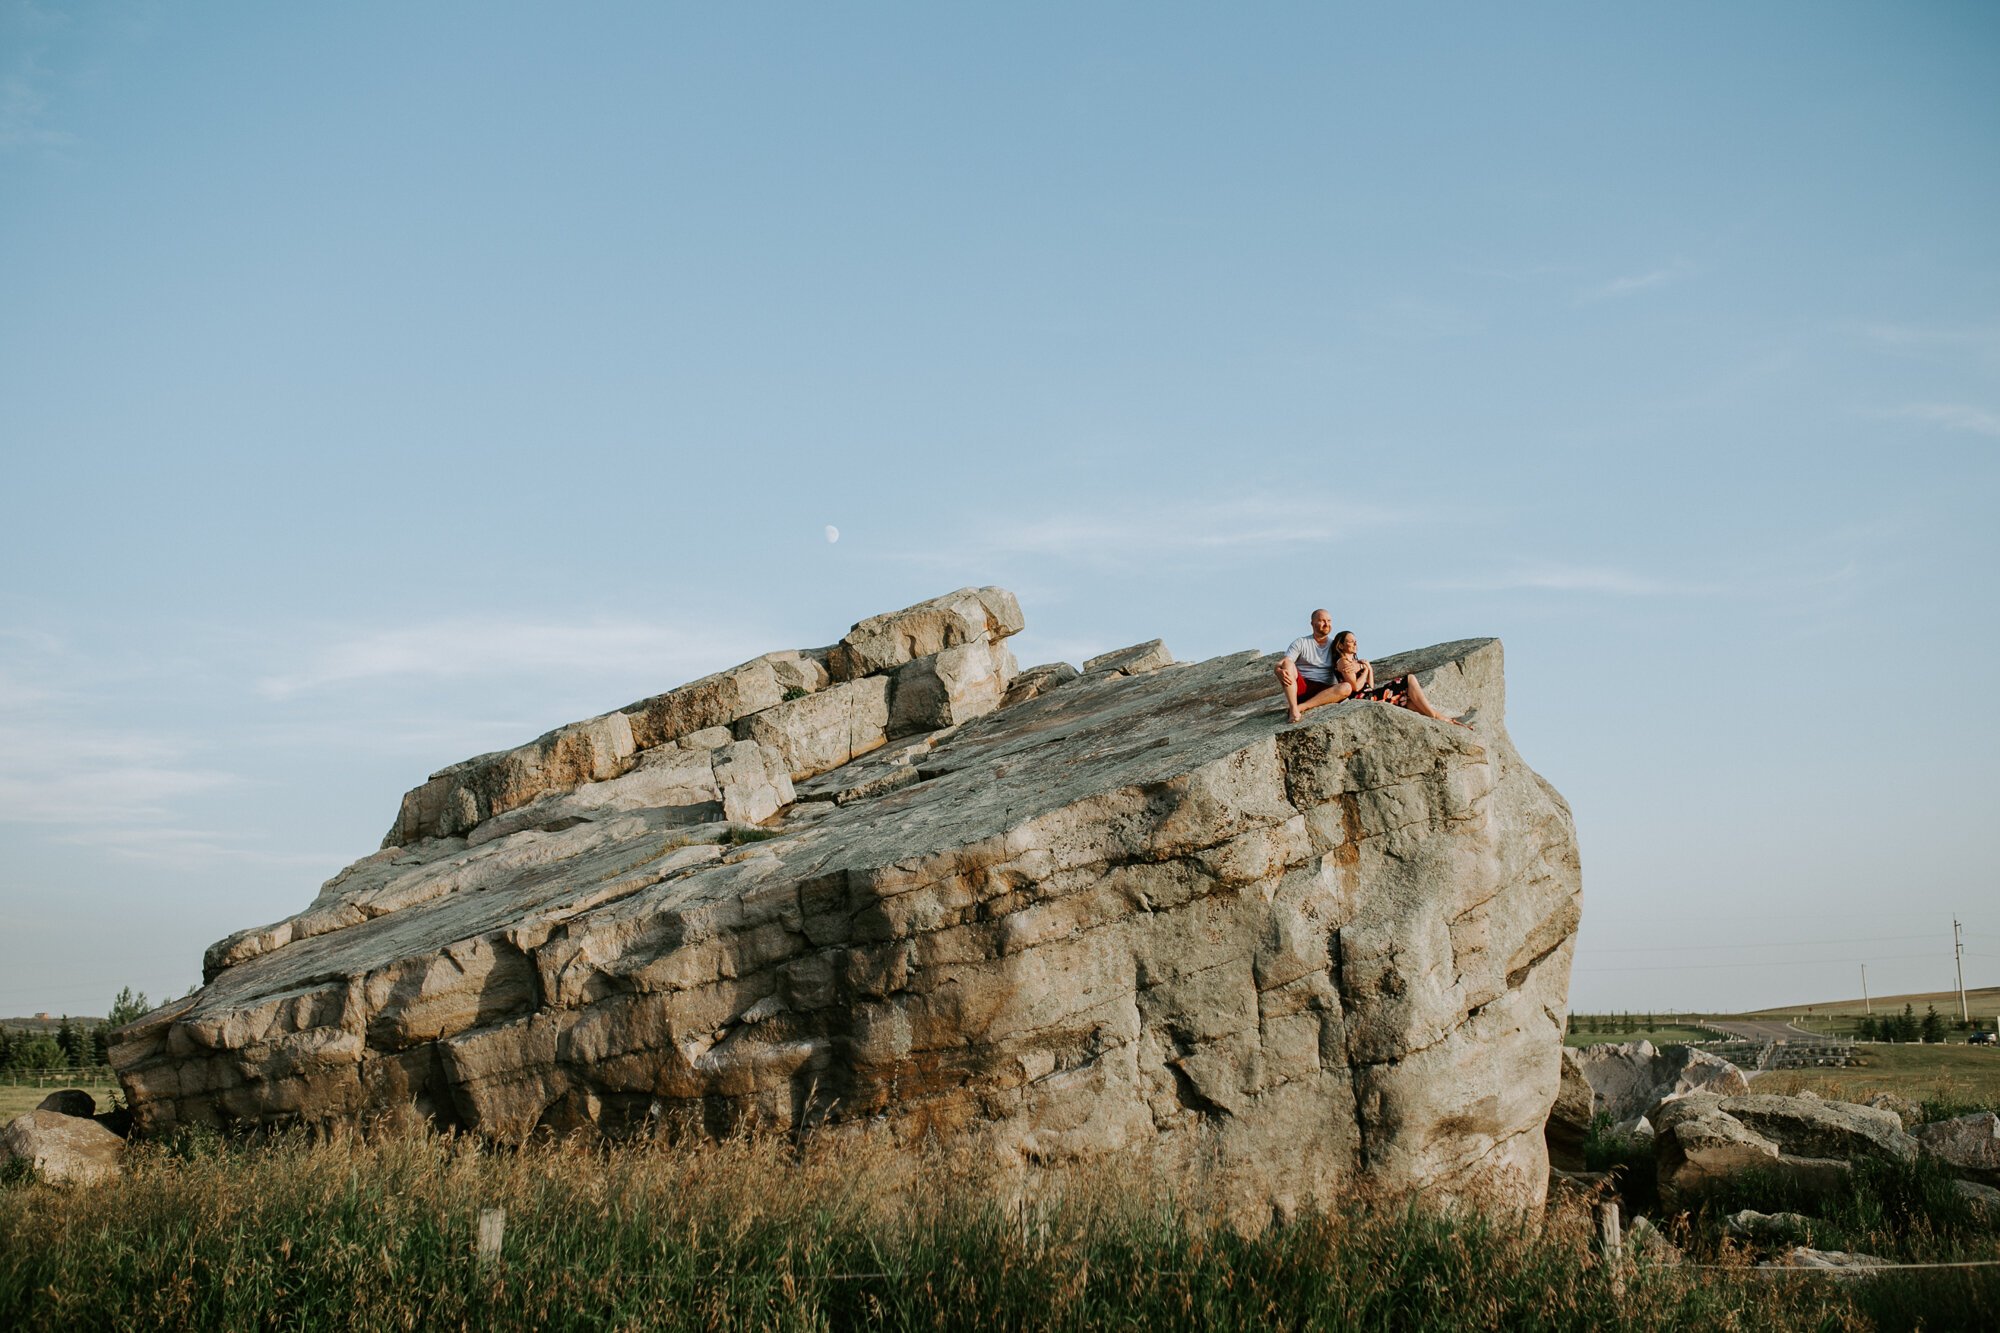  Two things I love about this photo. 1.  J+J’s willingness to climb on top this massive rock (with the bride in a dress no less!) and 2. the fact that you can see the itty bitty moon in the background. 